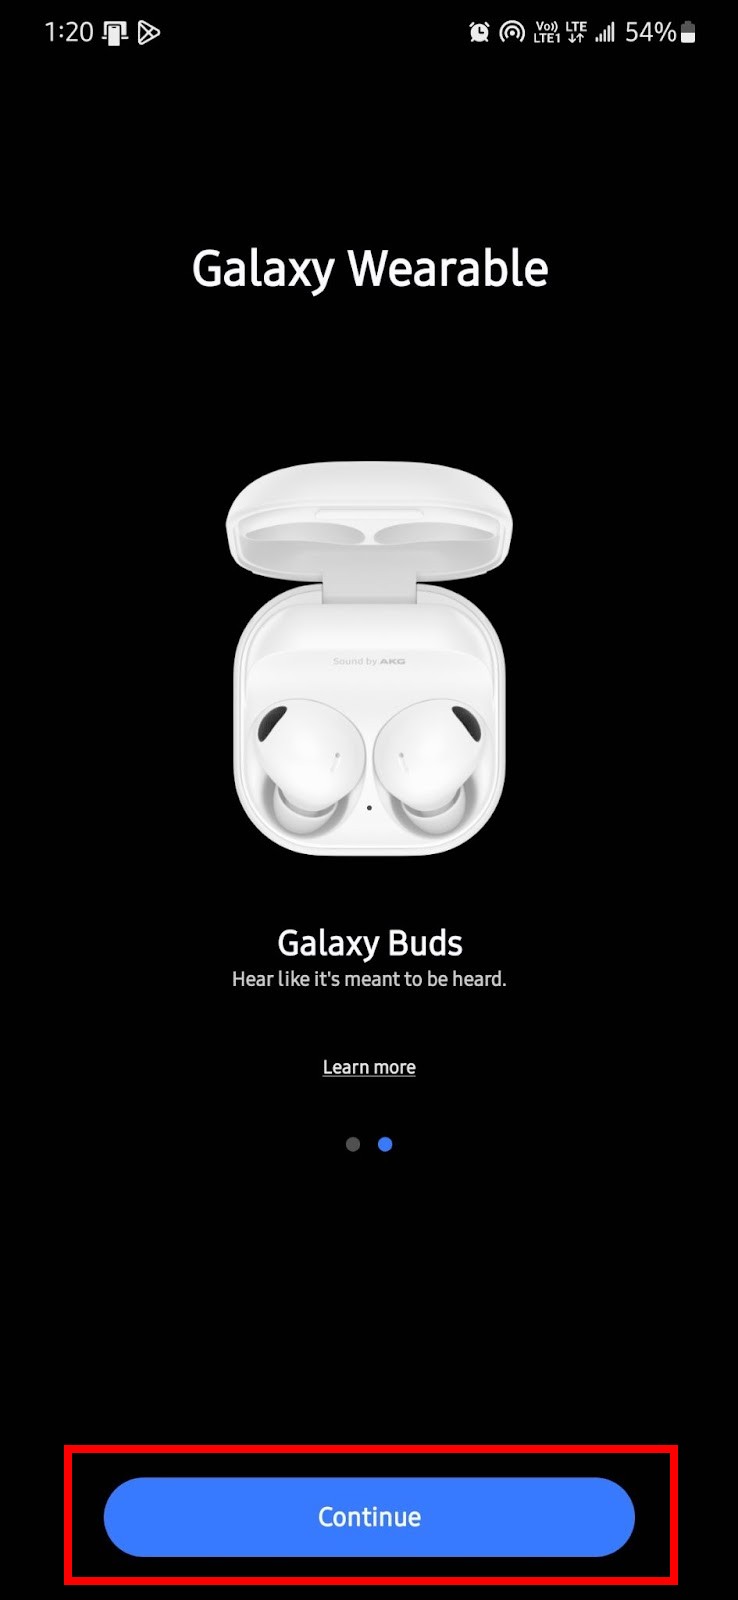 Homepage of the Galaxy Wearable app for Android